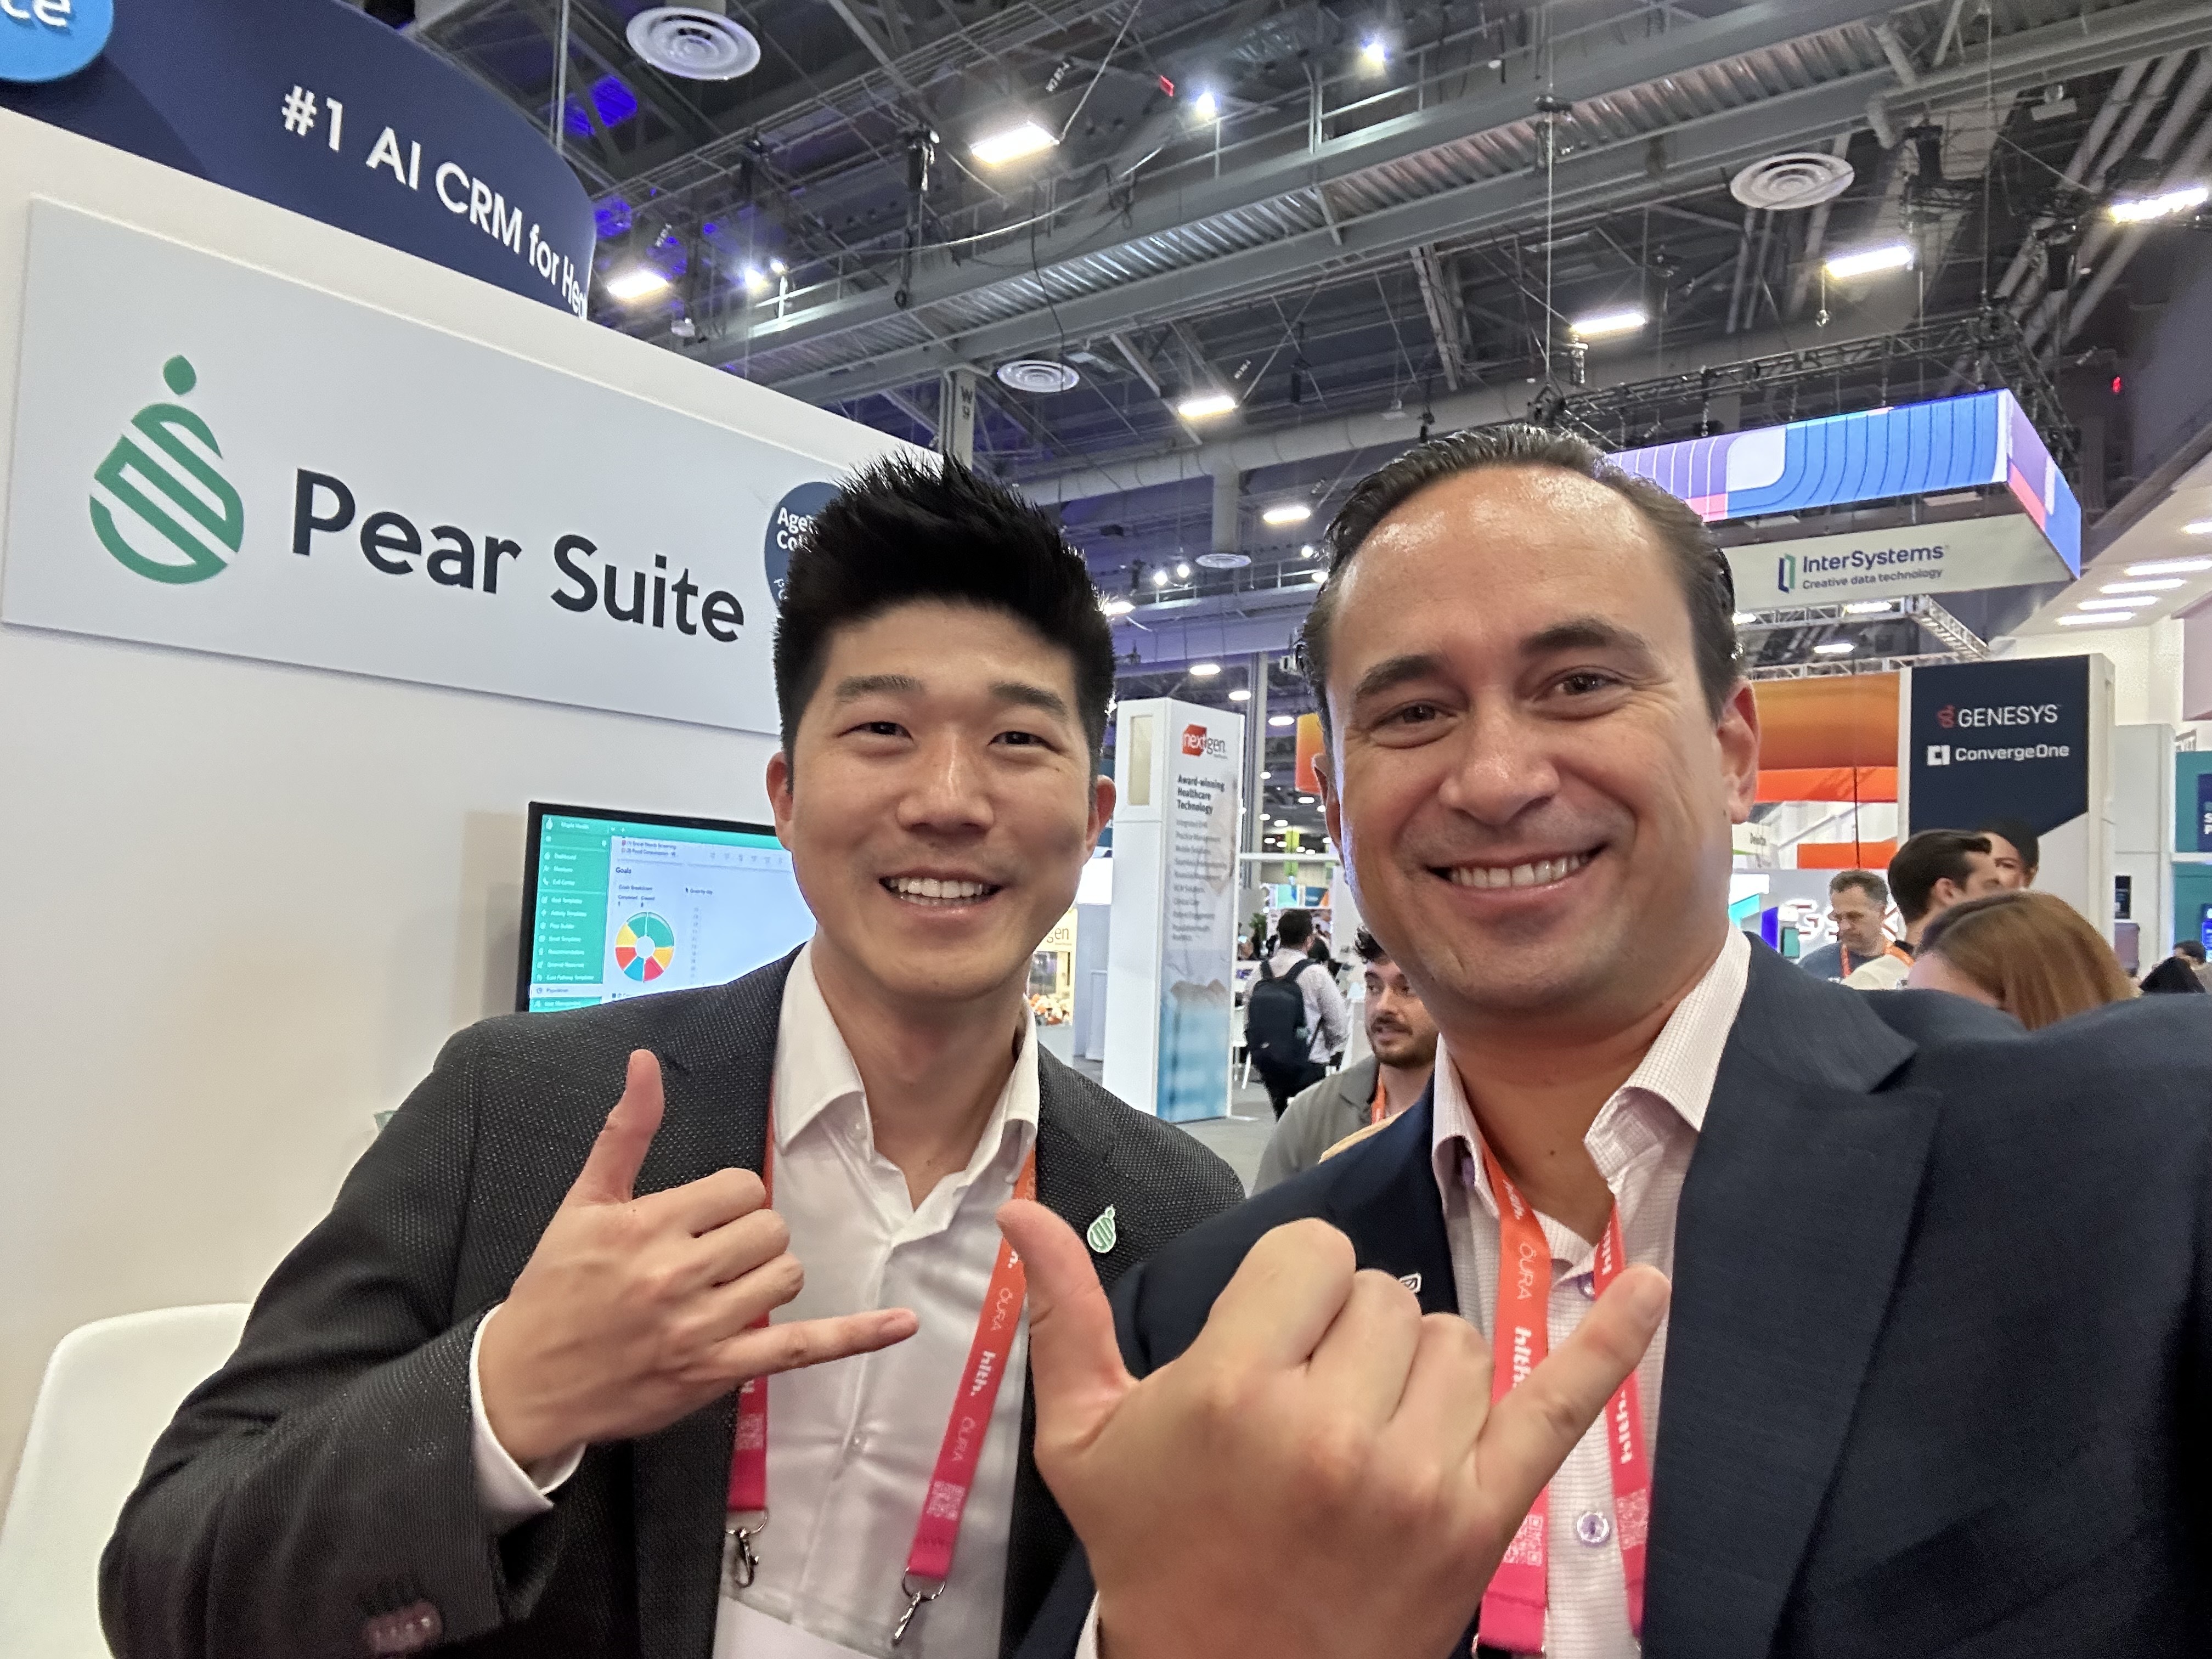 Nice to meet Colby Takeda (CEO, Pear Suite) IRL today. We're the only Hawaii startups at HLTH23.